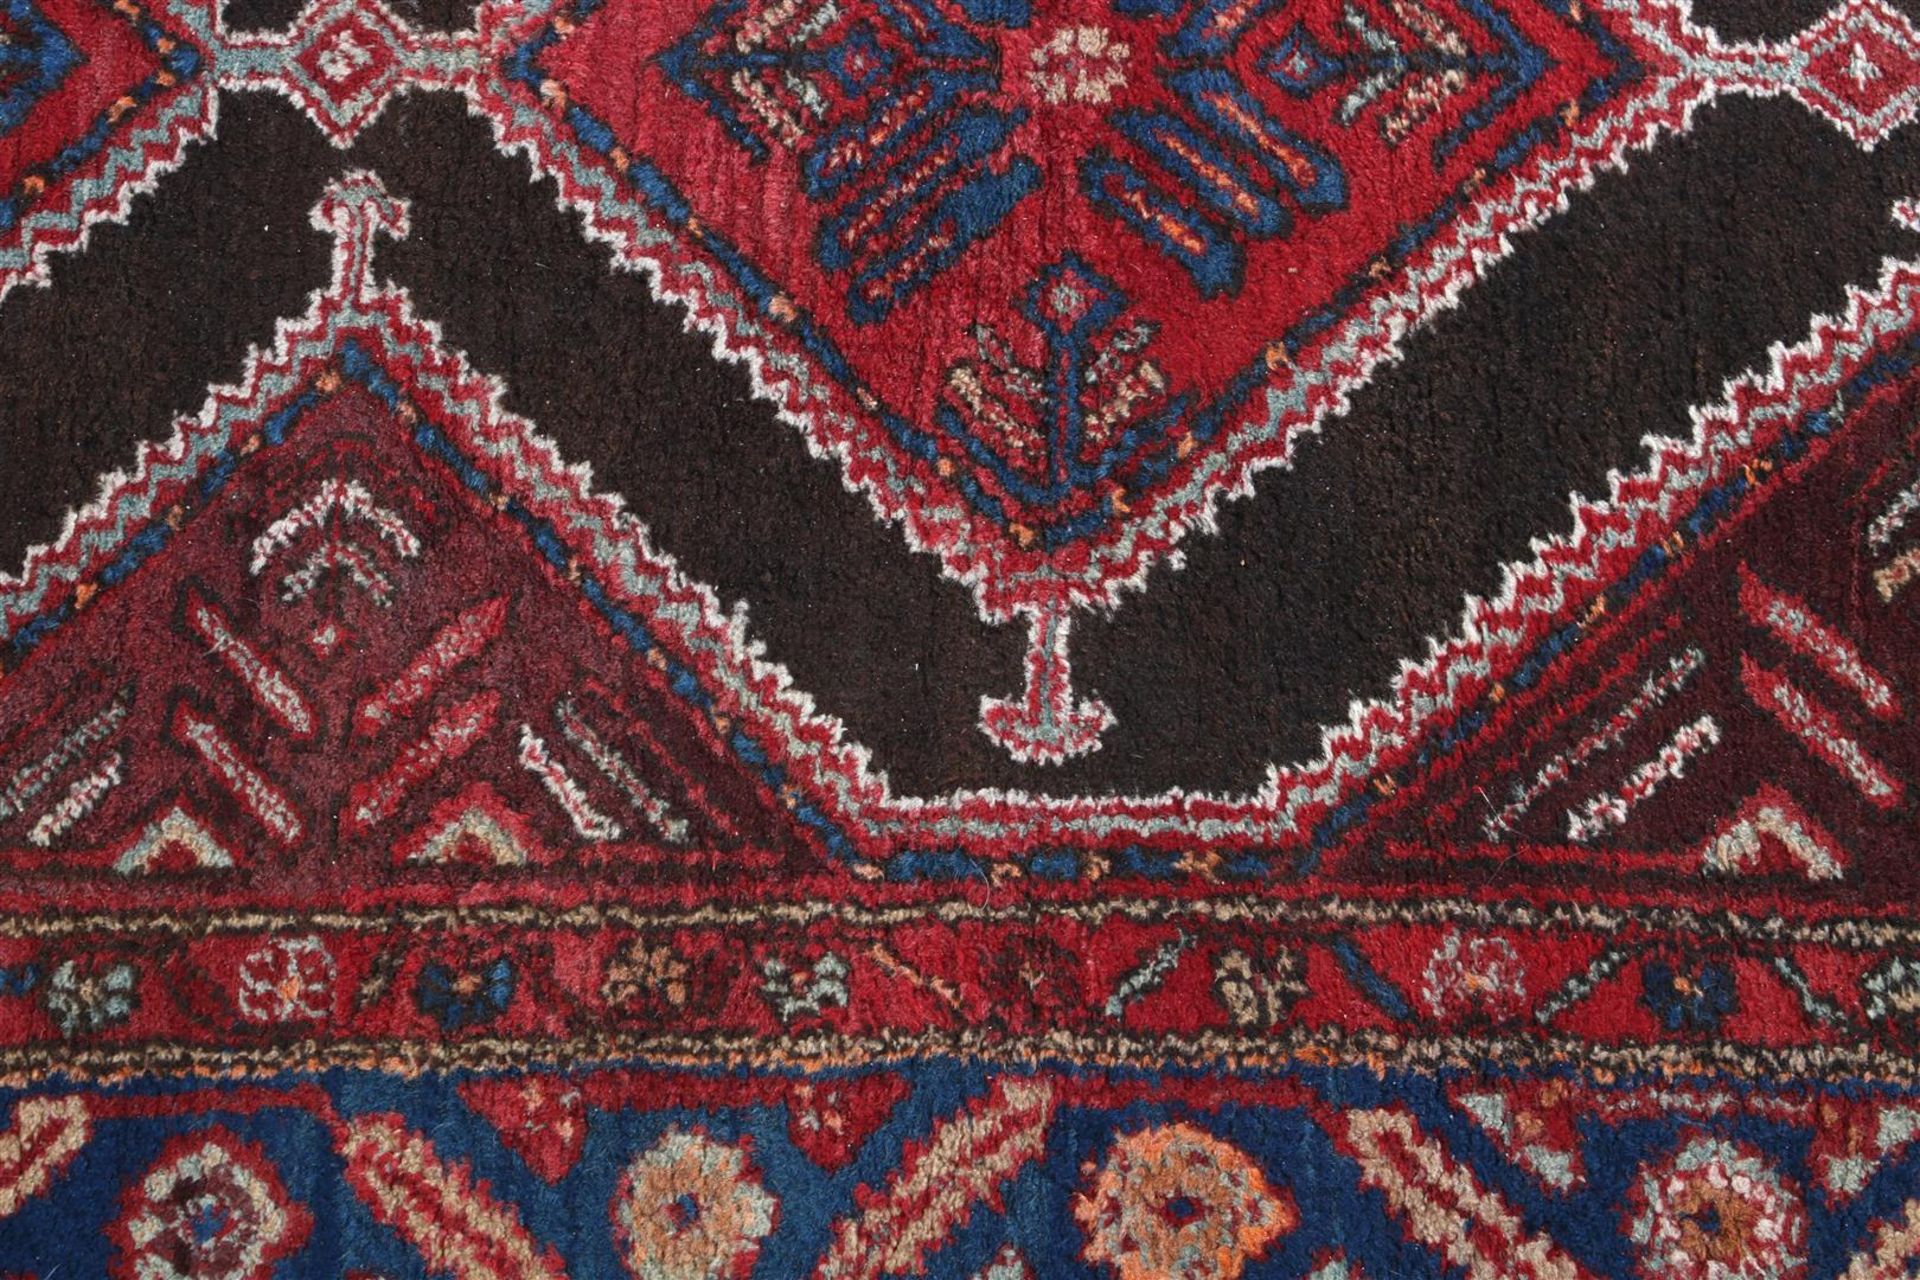 Oriental hand-knotted carpet - Image 3 of 3